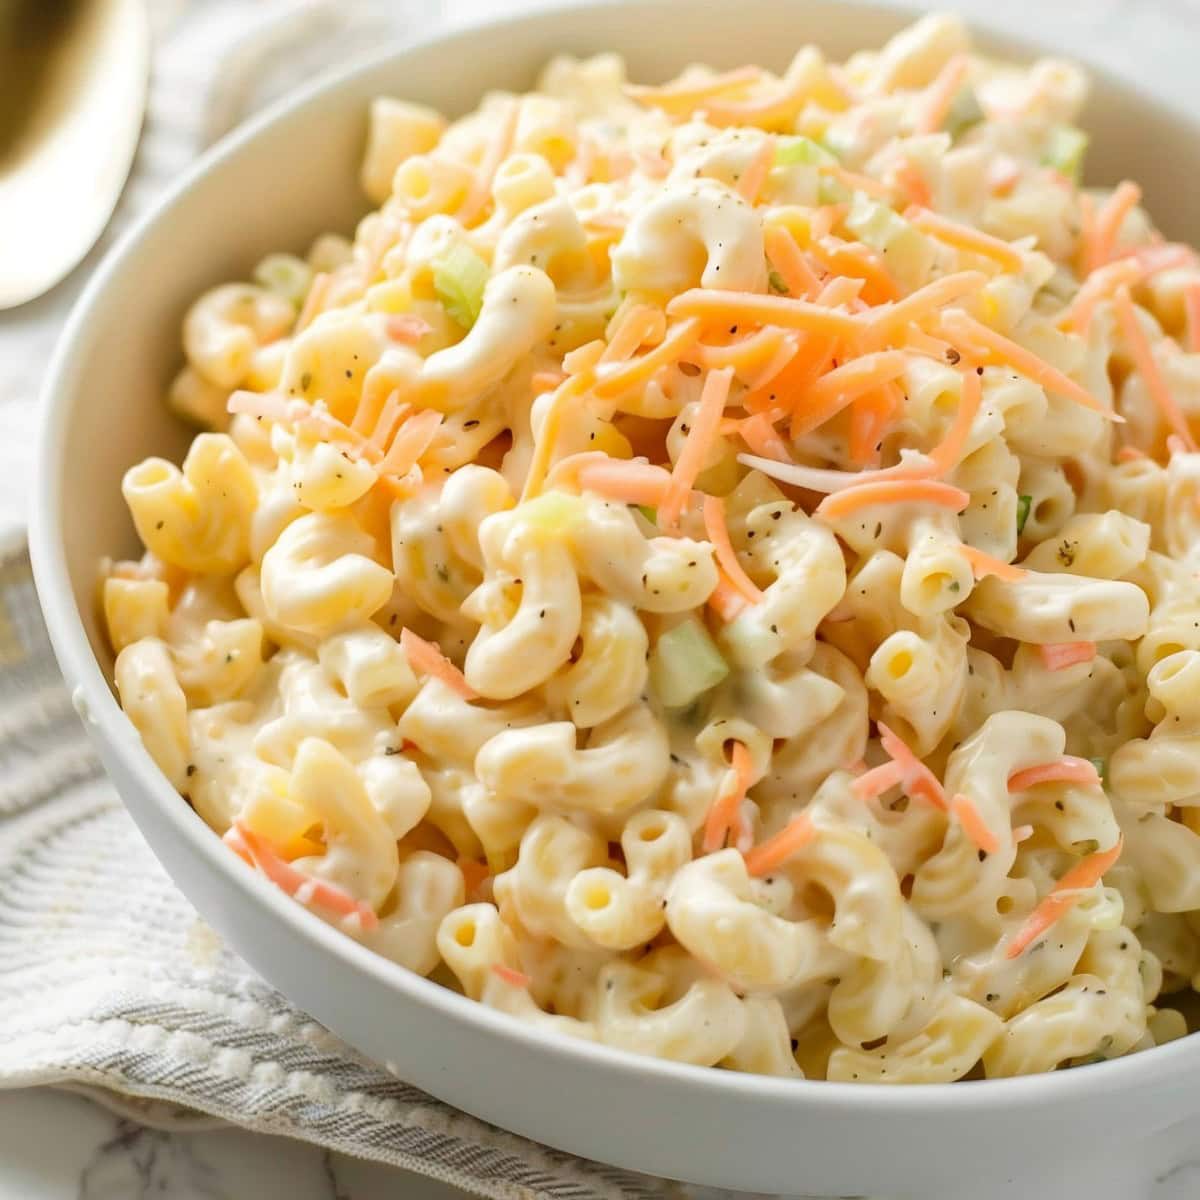 Delicious macaroni salad with a Hawaiian twist, combining carrots, celery, and chopped onions